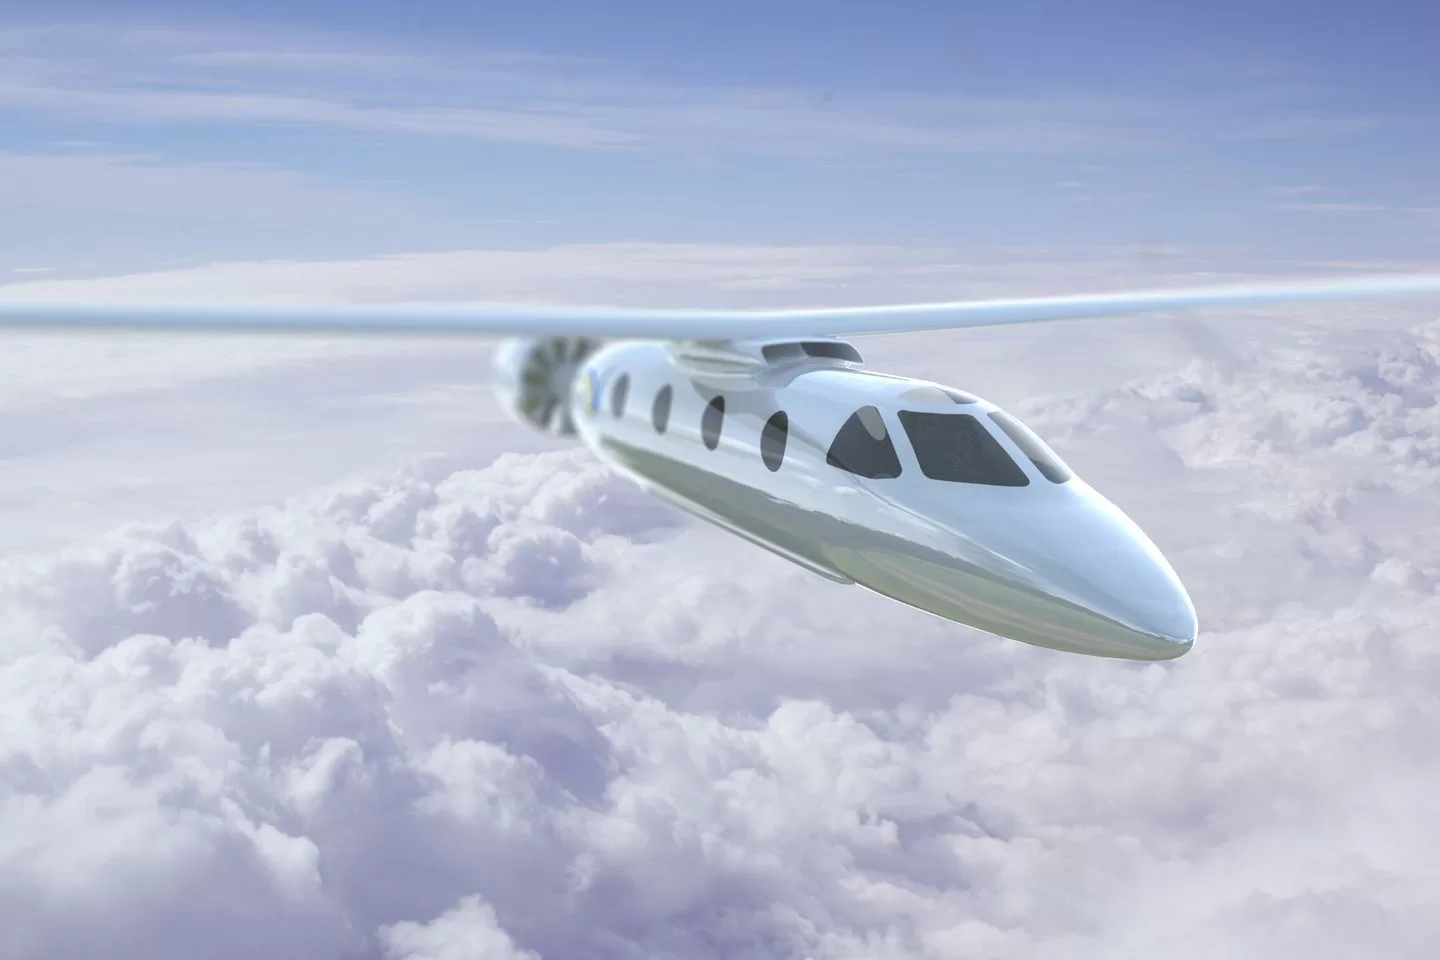 Electric Aircraft Market Is Estimated To Witness High Growth Owing To Sustainable Aviation Initiatives And Increasing Adoption Of Electric Propulsion Systems